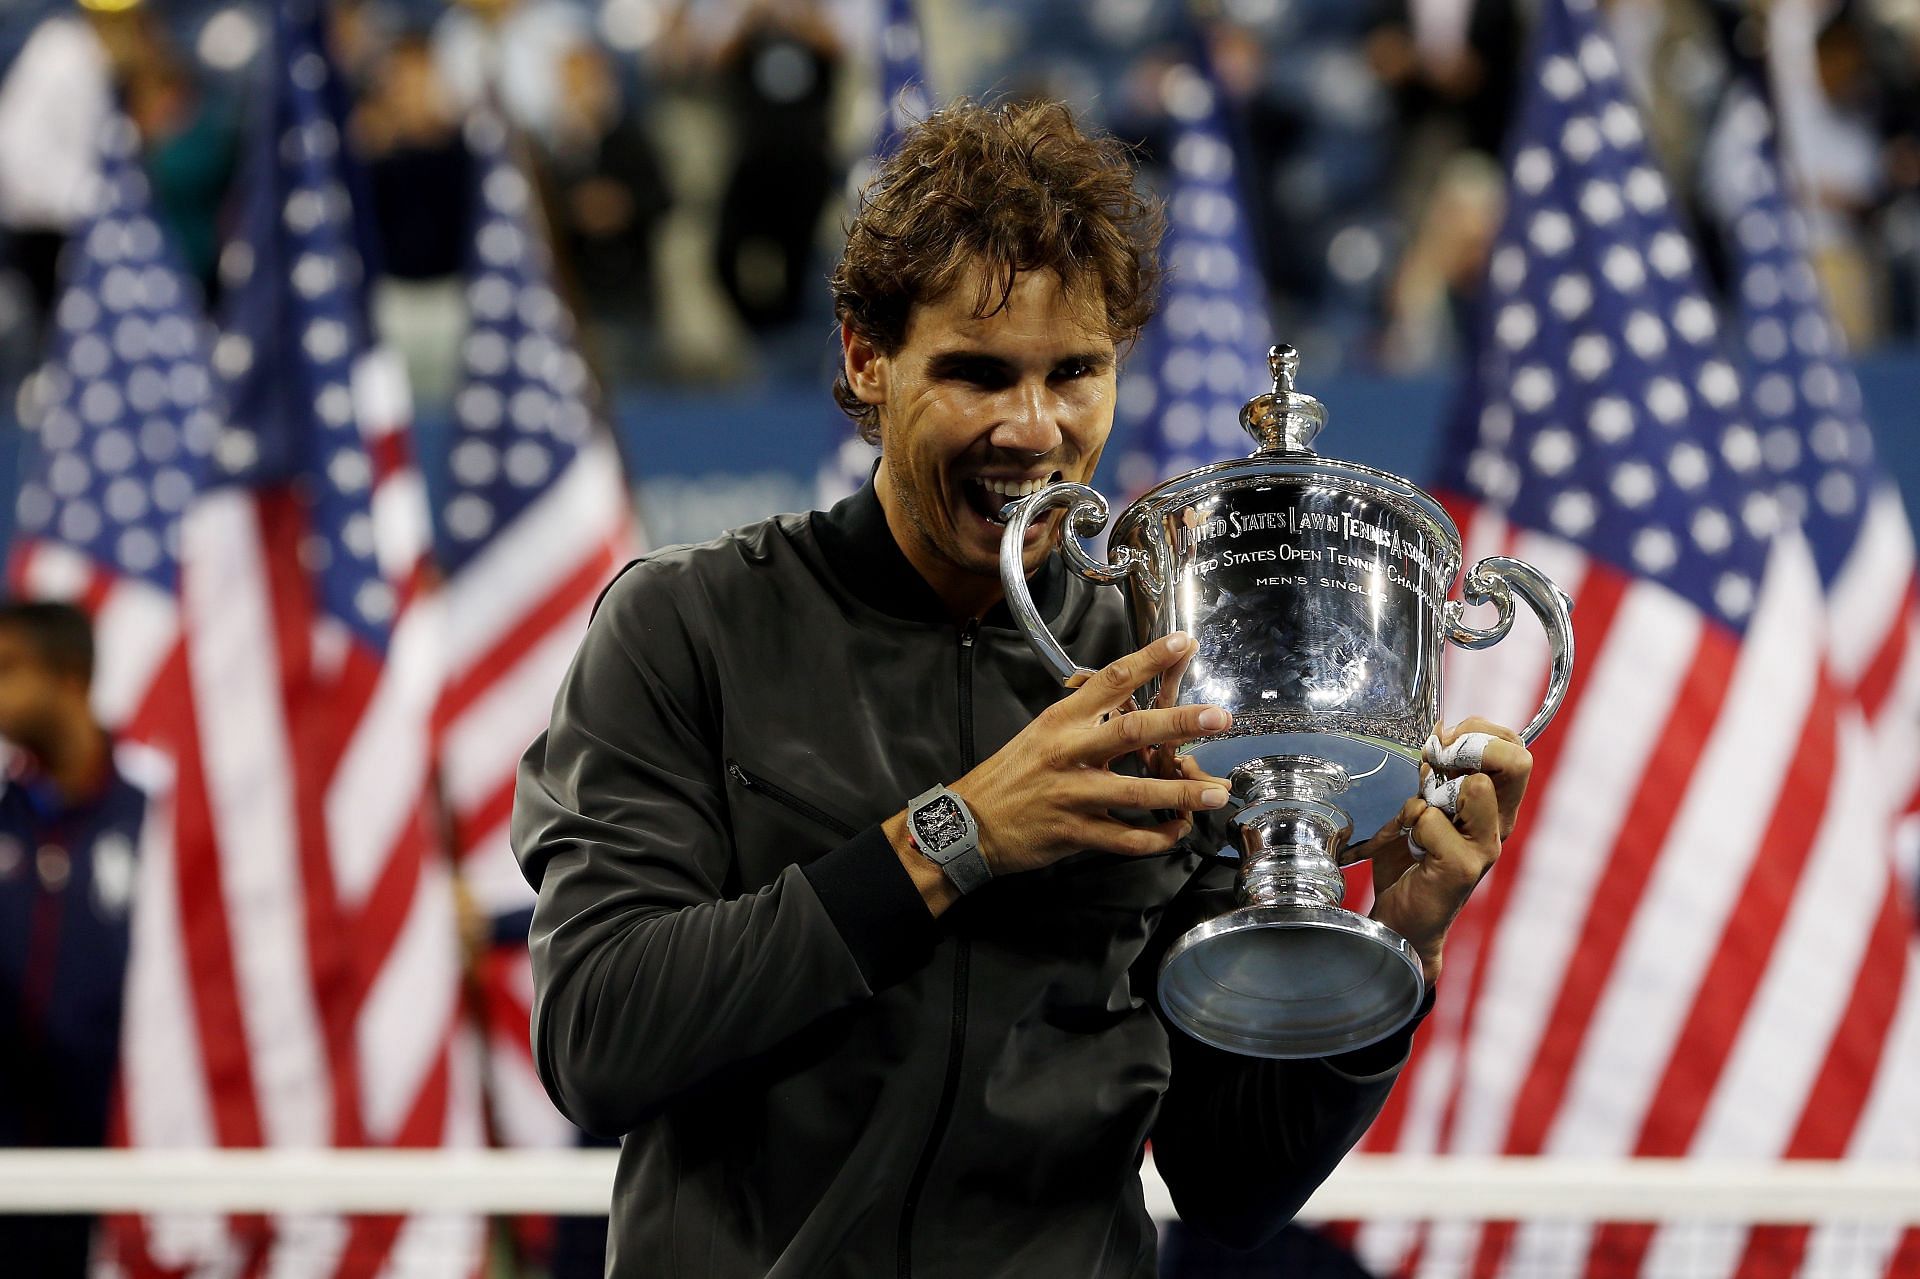 Serena Williams and Rafael Nadal won the 2013 US Open together to close out the collection